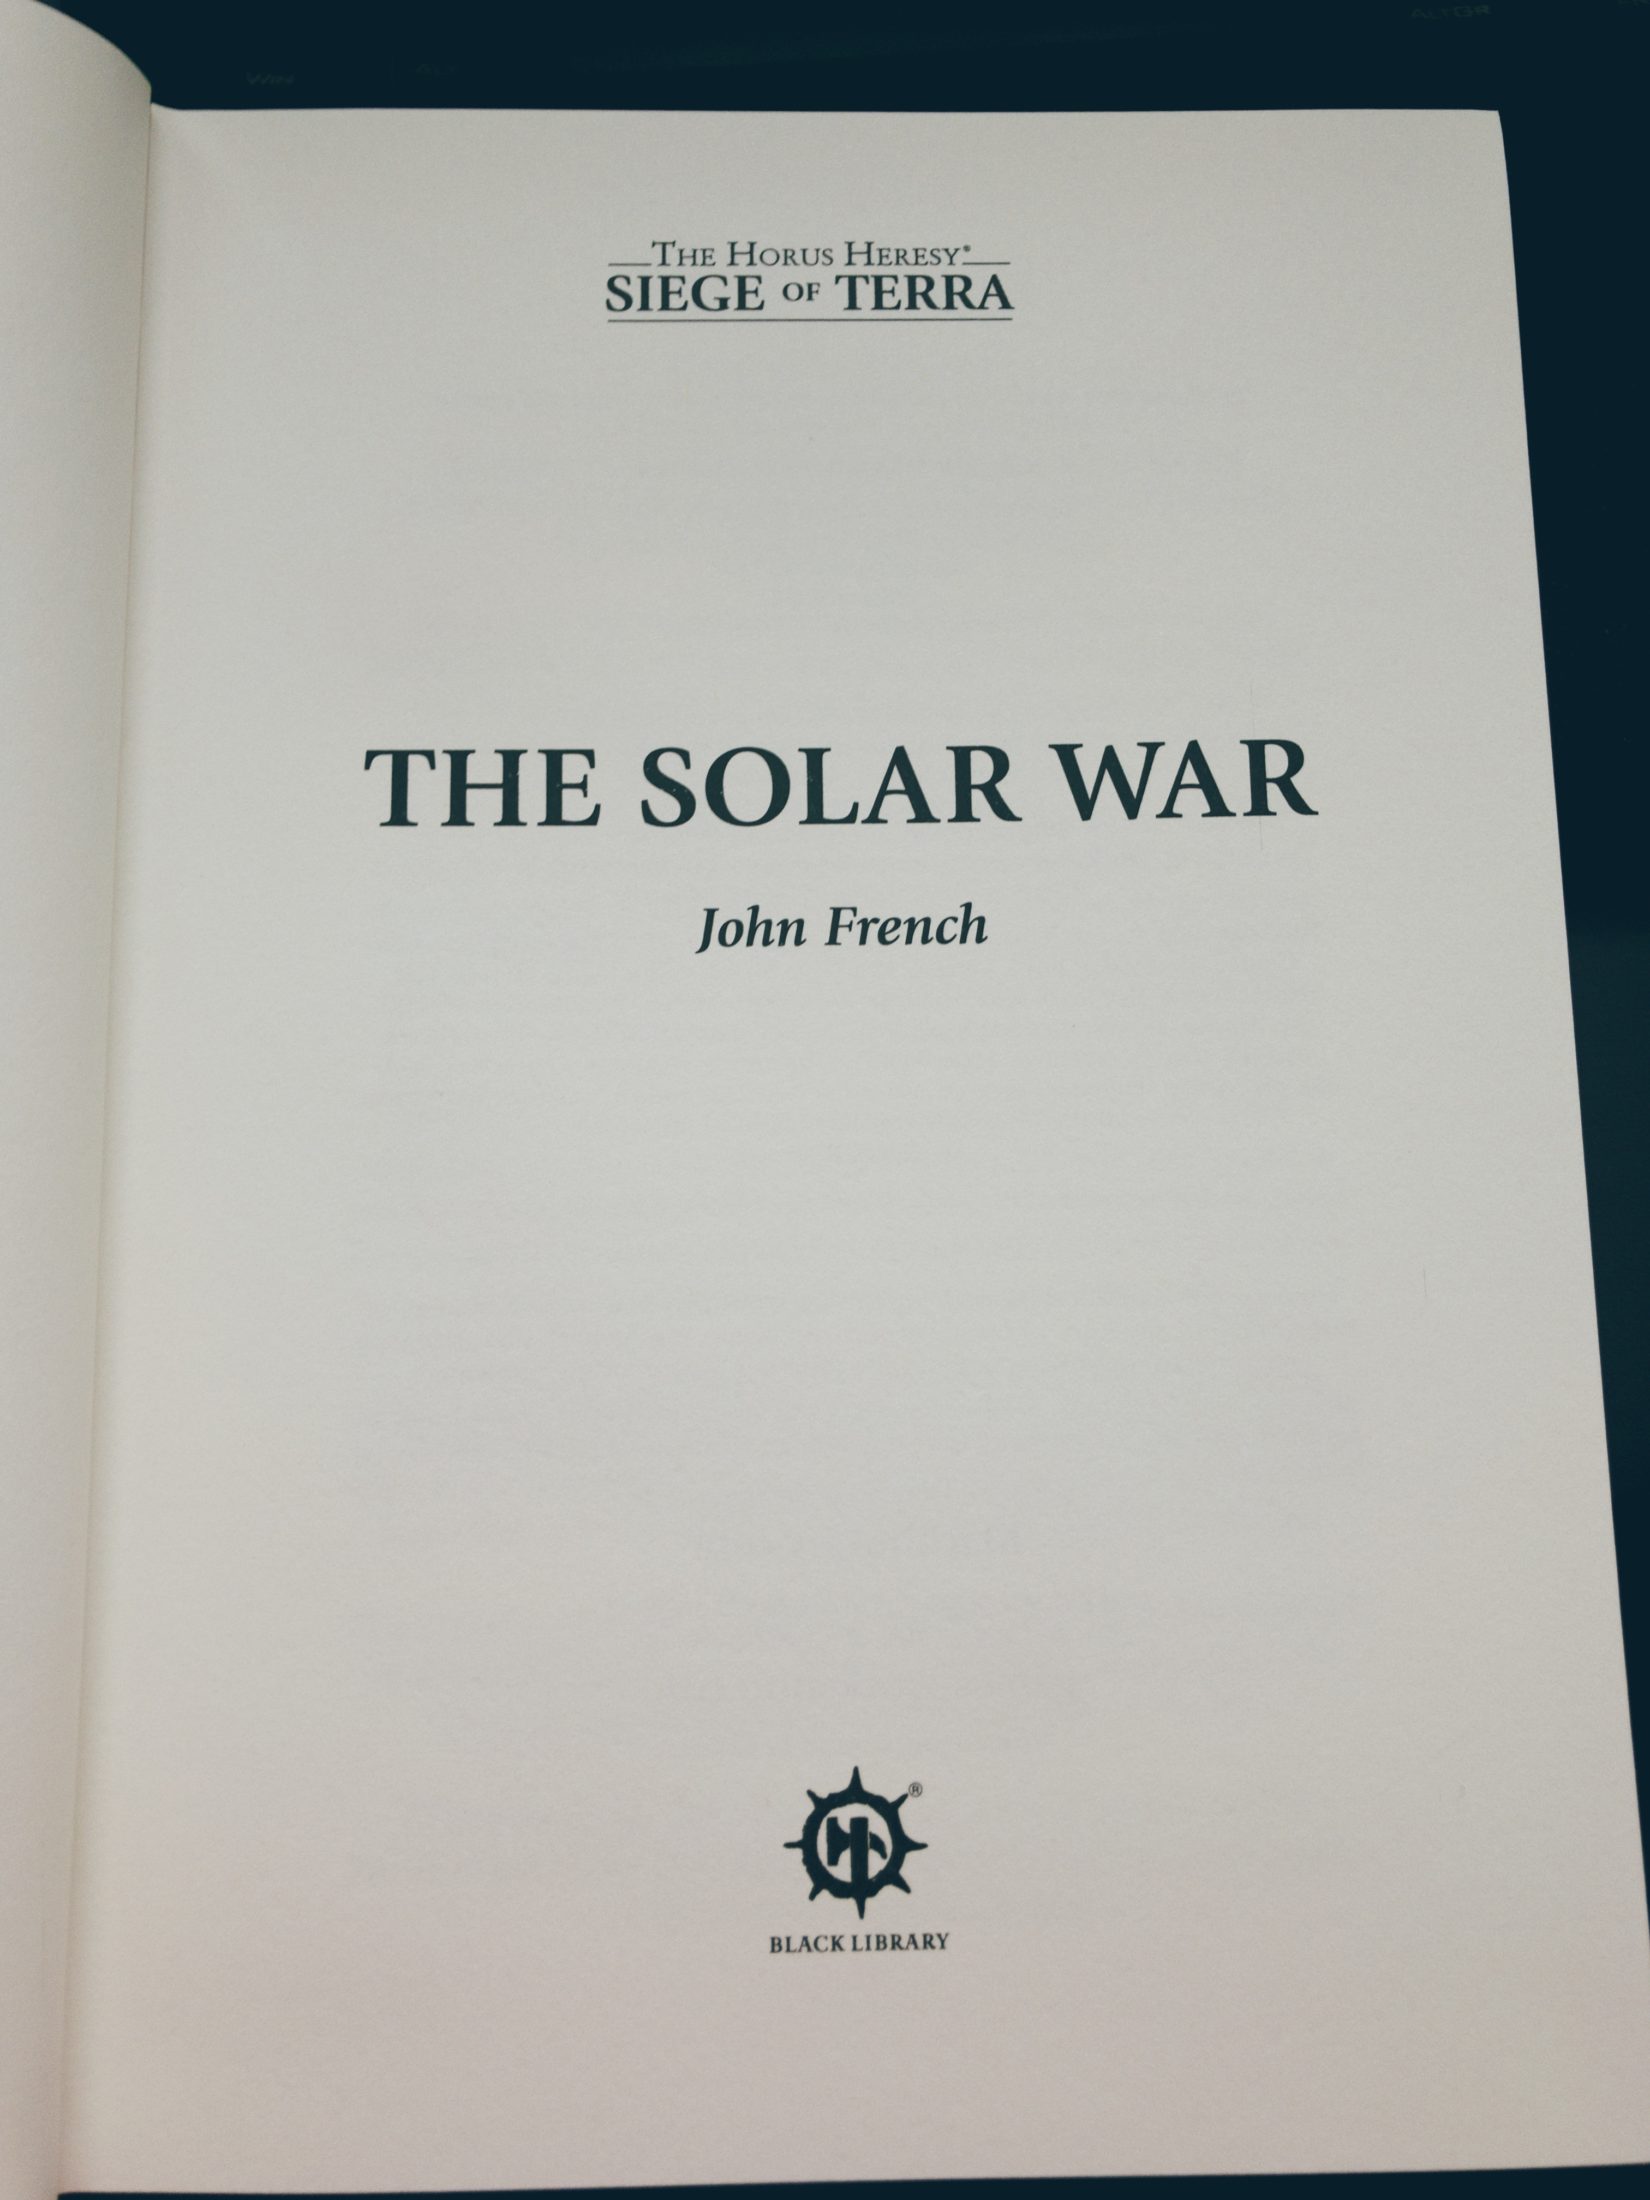 The Solar War internal title page